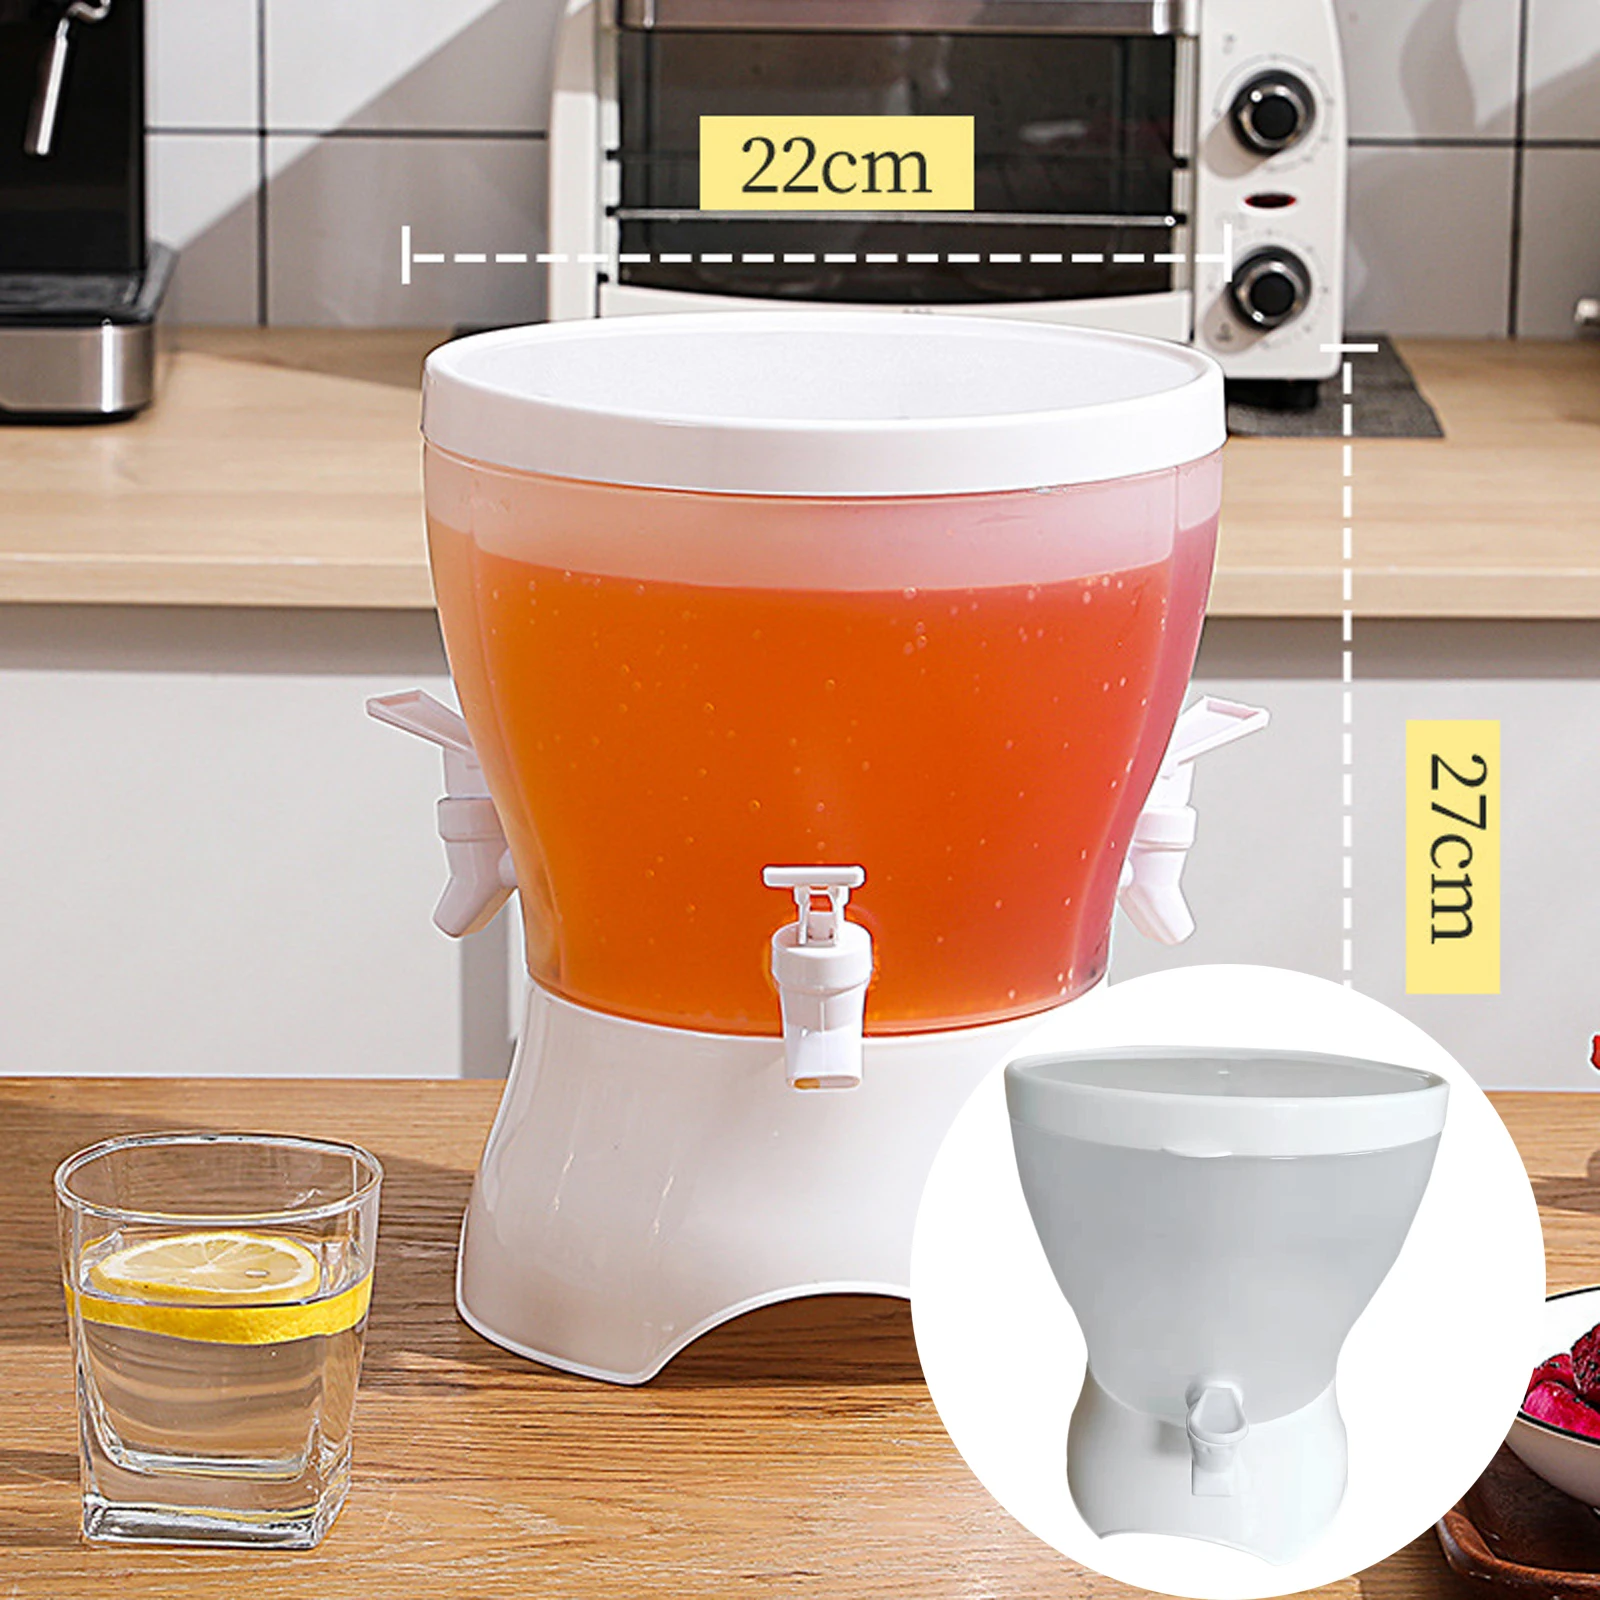 3 Compartments Water Jug With Faucet Cold Water Bottle Kettle Lemon Juice Jugs Kitchen Drinkware Container Heat Resistant